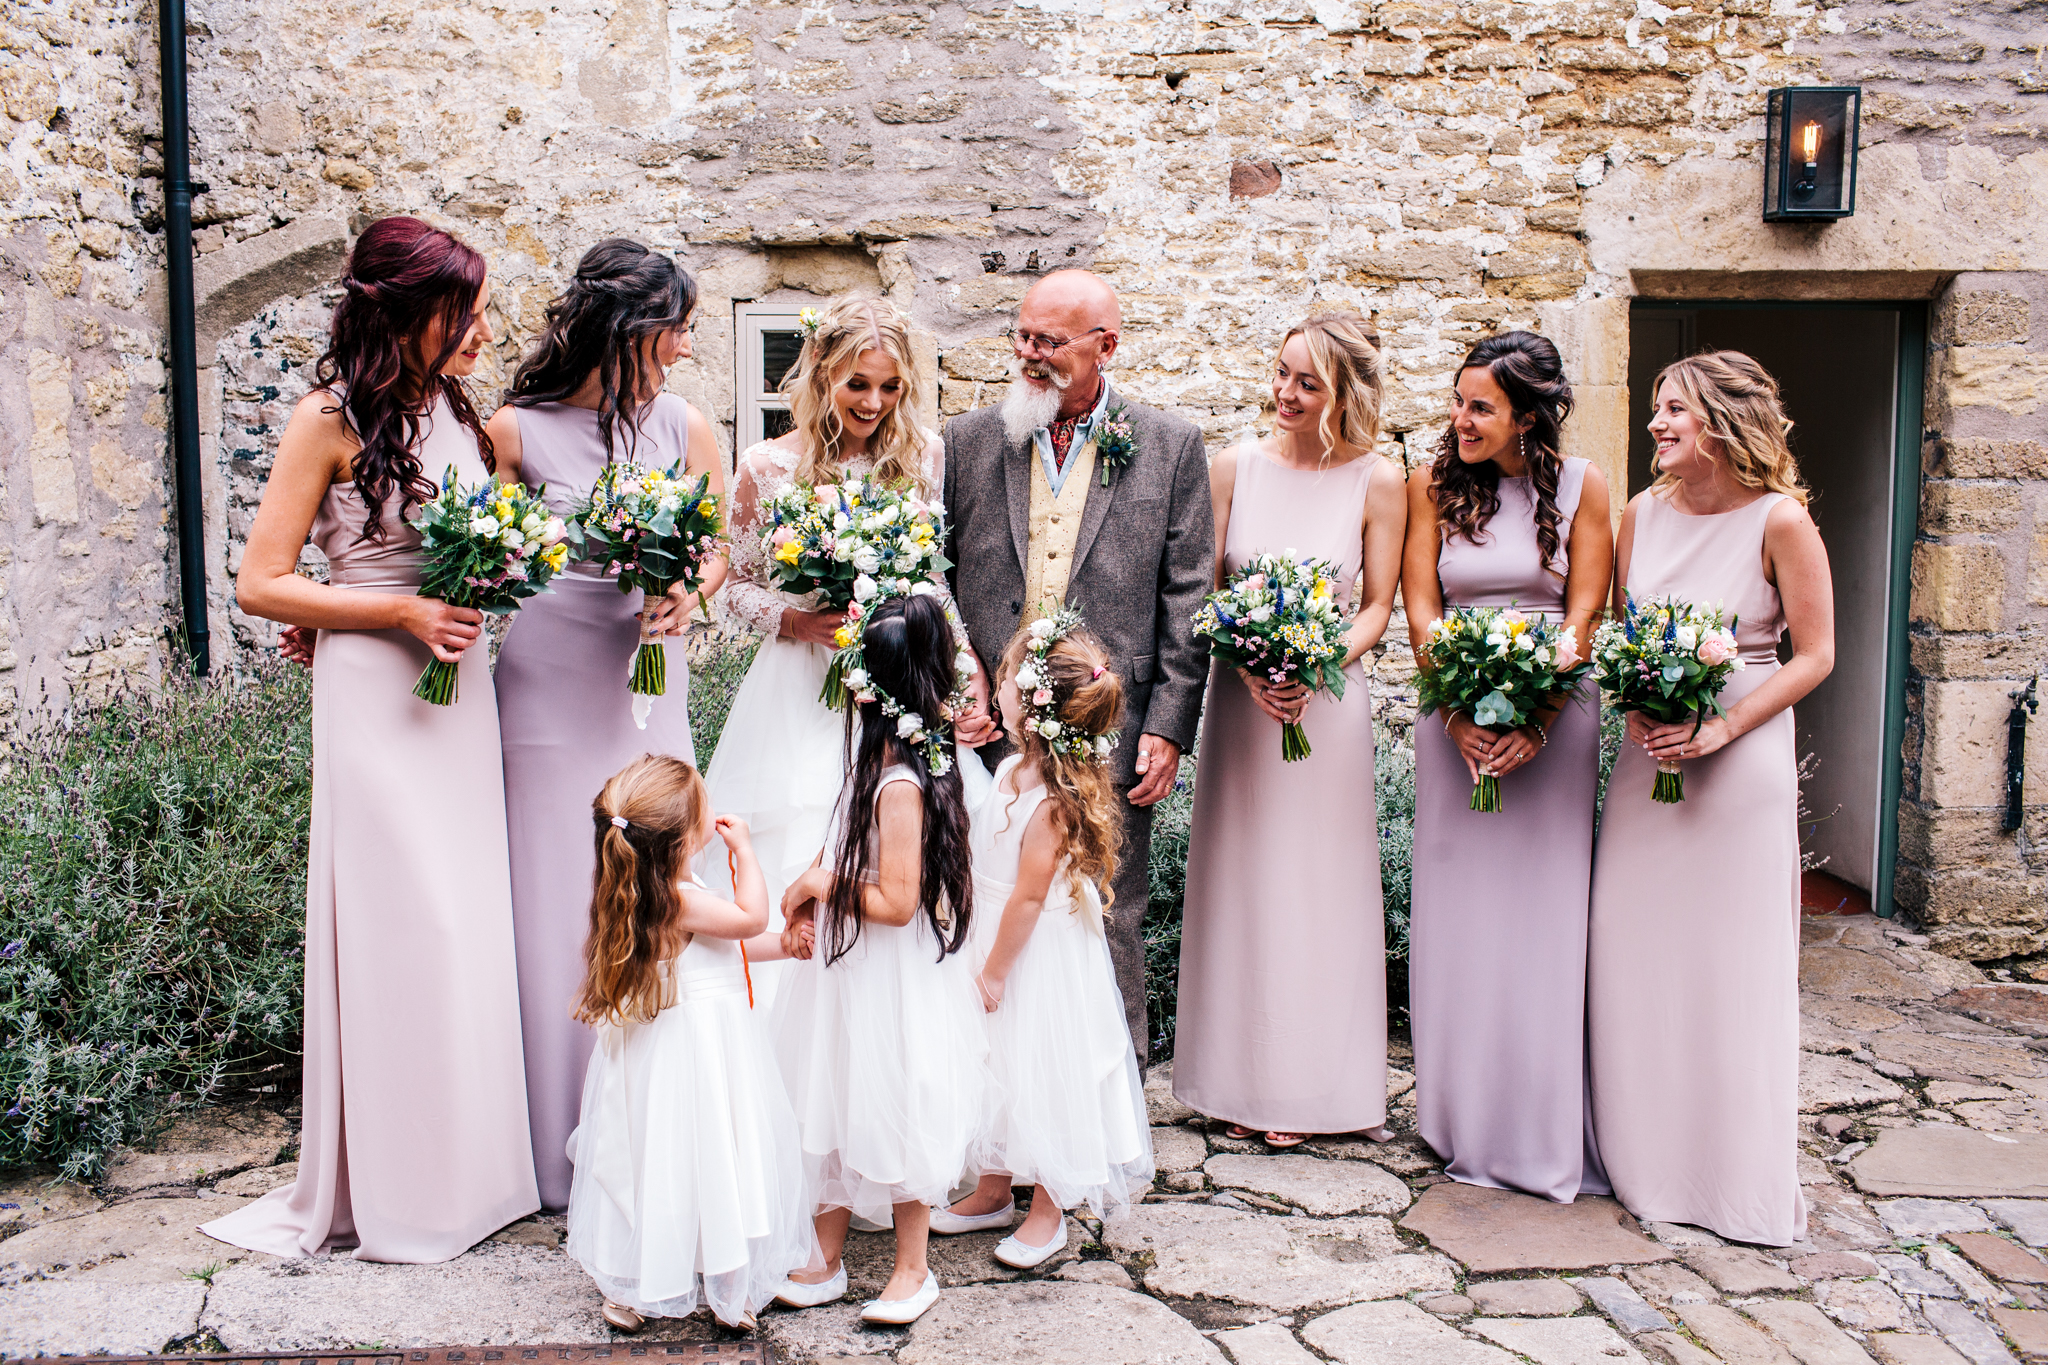 Group shot of bride and bridesmaid before the wedding at Mells Walled Garden